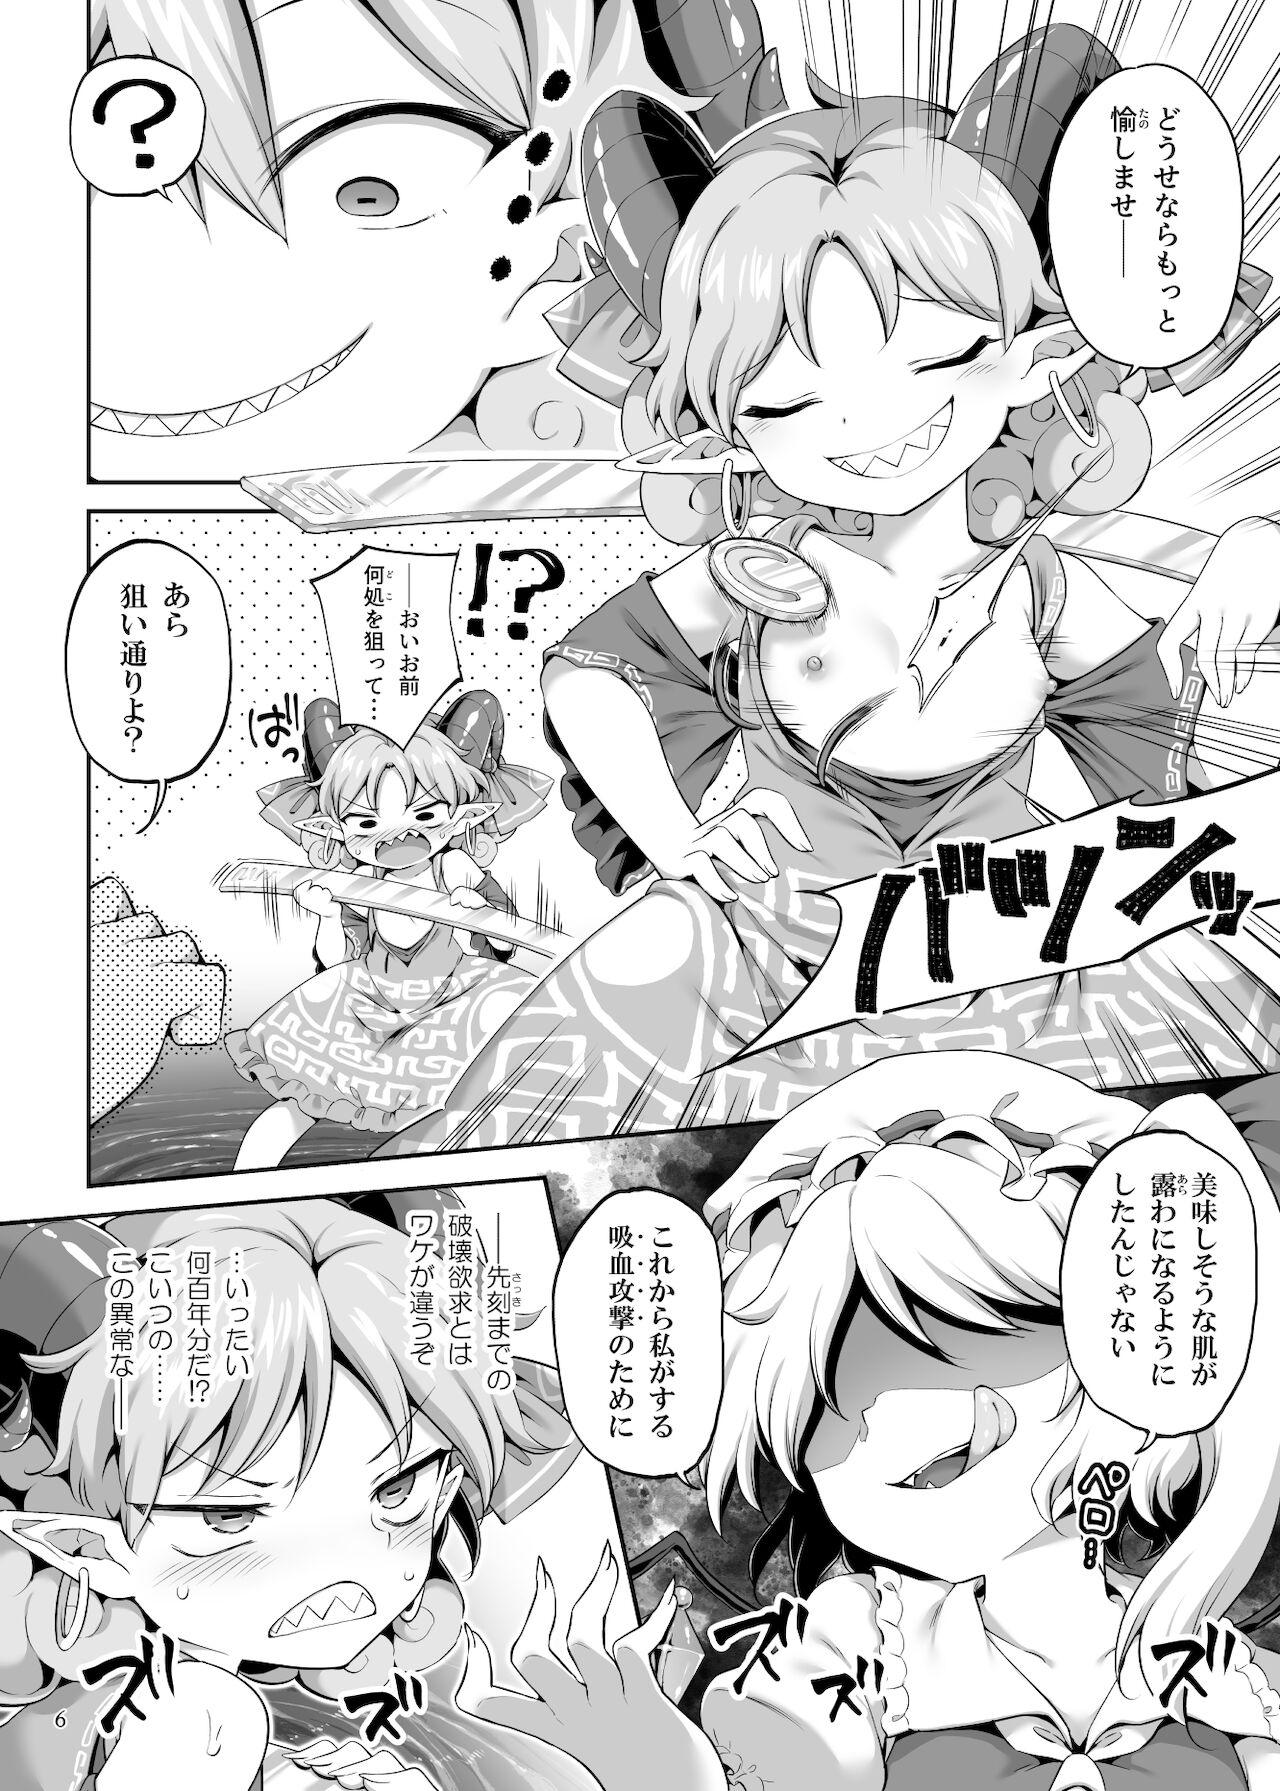 Celebrity Sex 吸われて駄目なら吸ってみろ! - Touhou project Super - Page 6